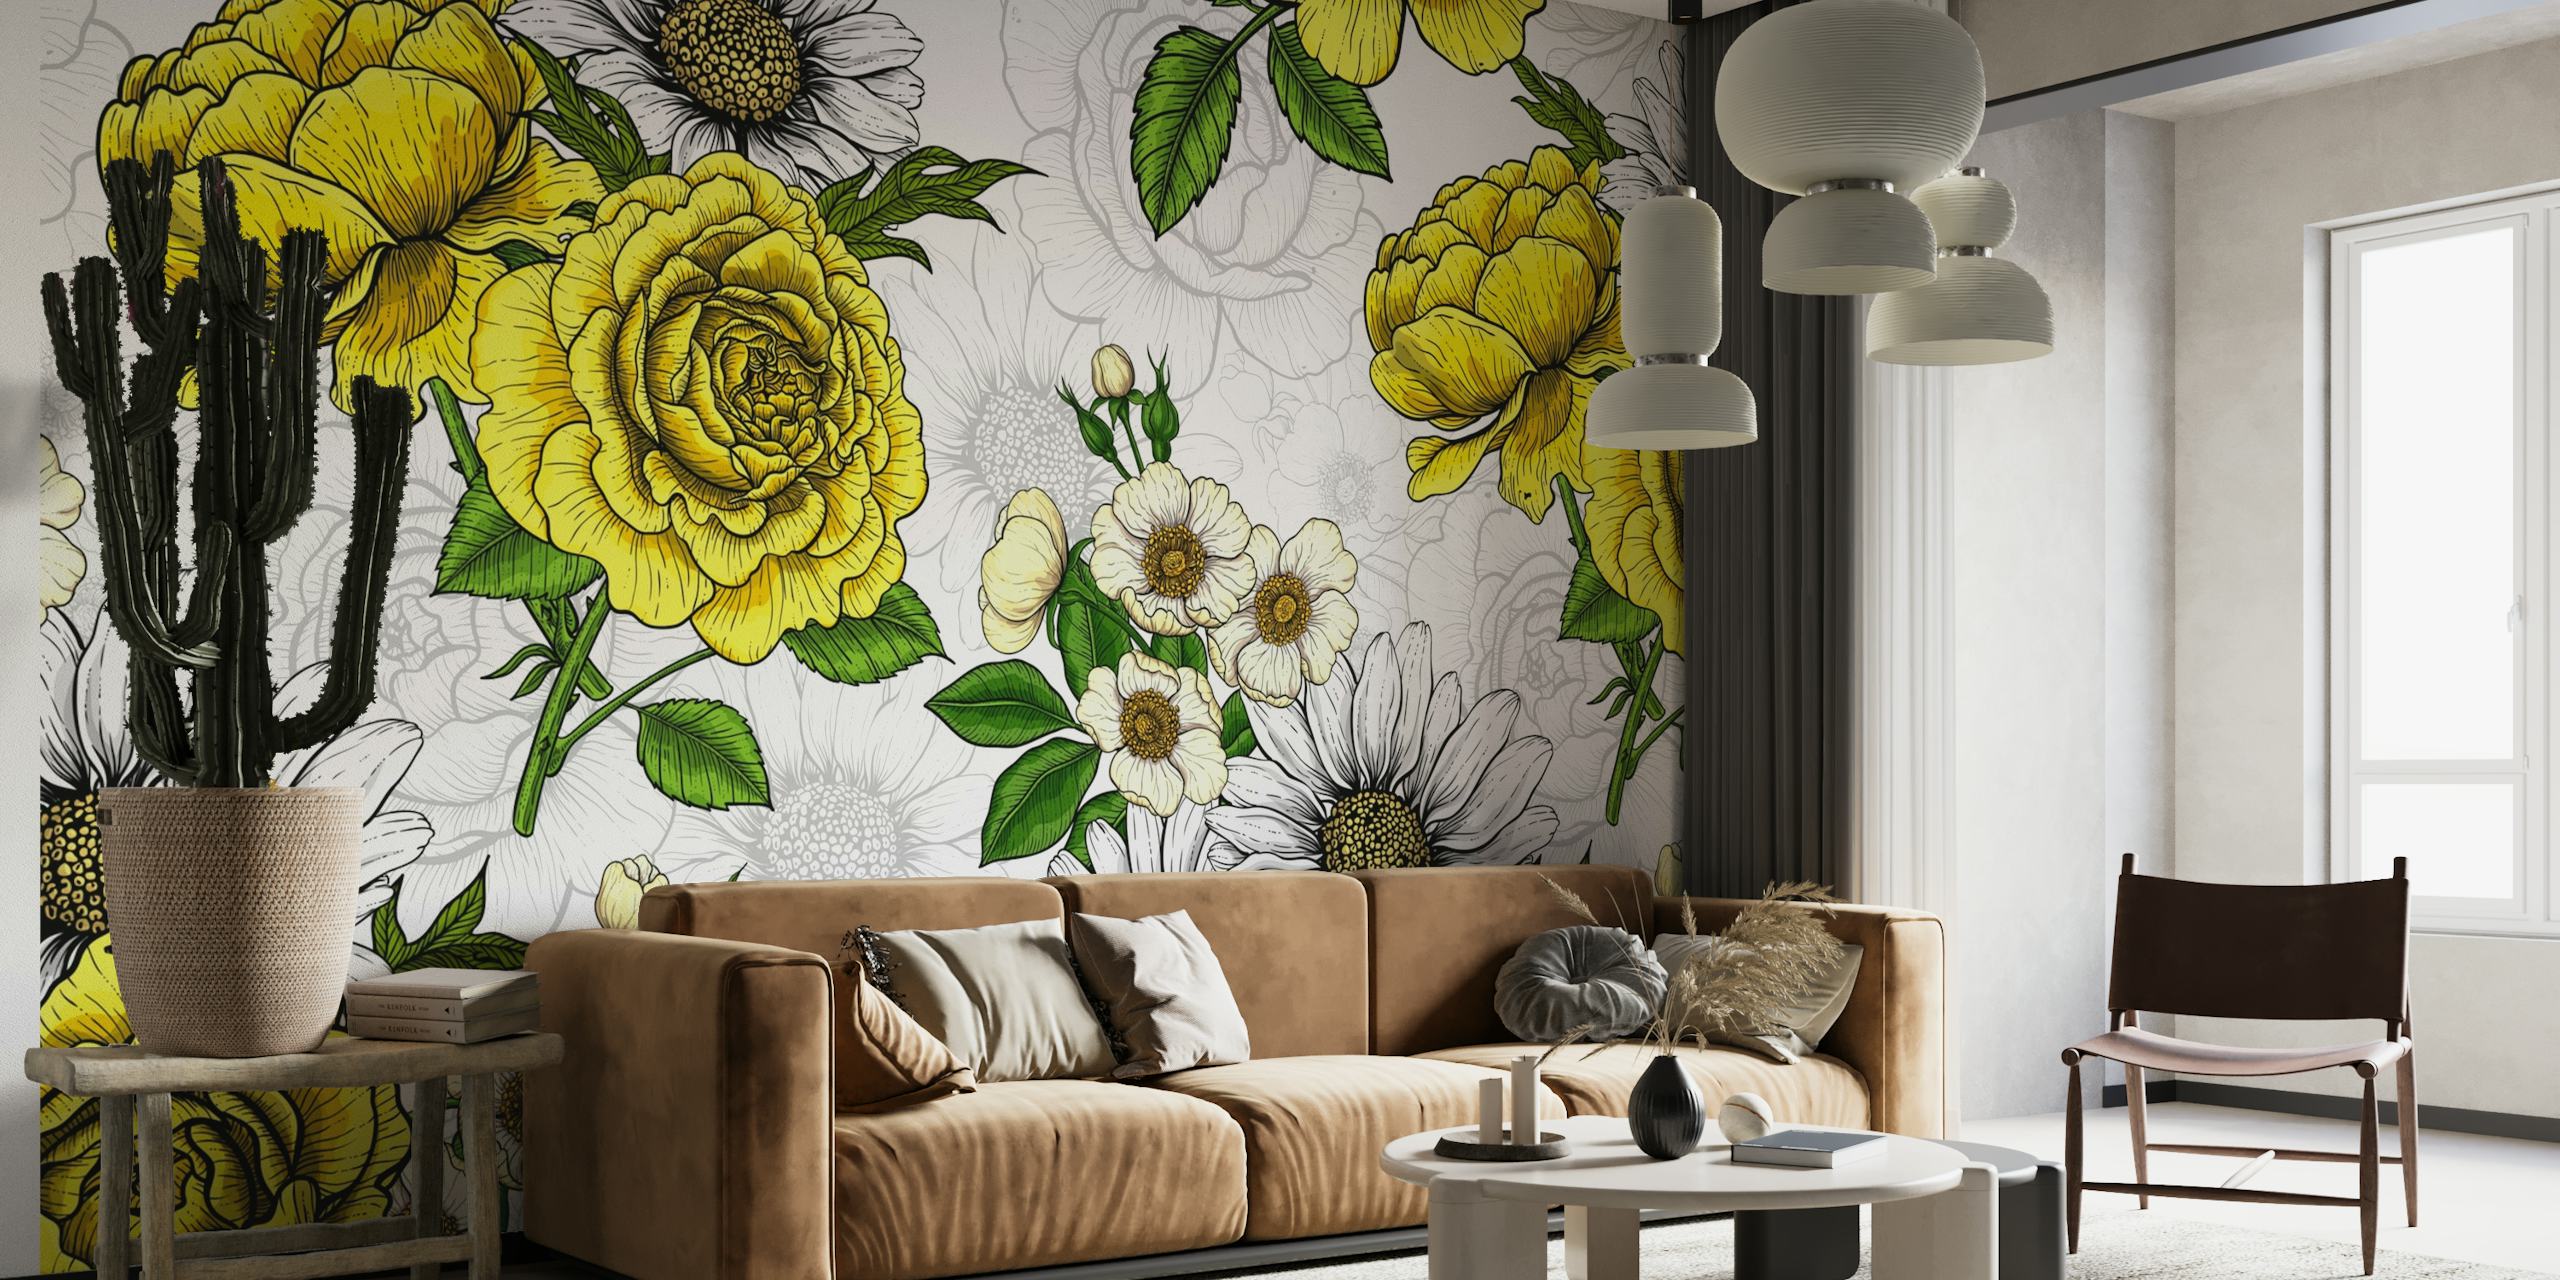 Summer Bouquets 3 wall mural with yellow roses and white daisies